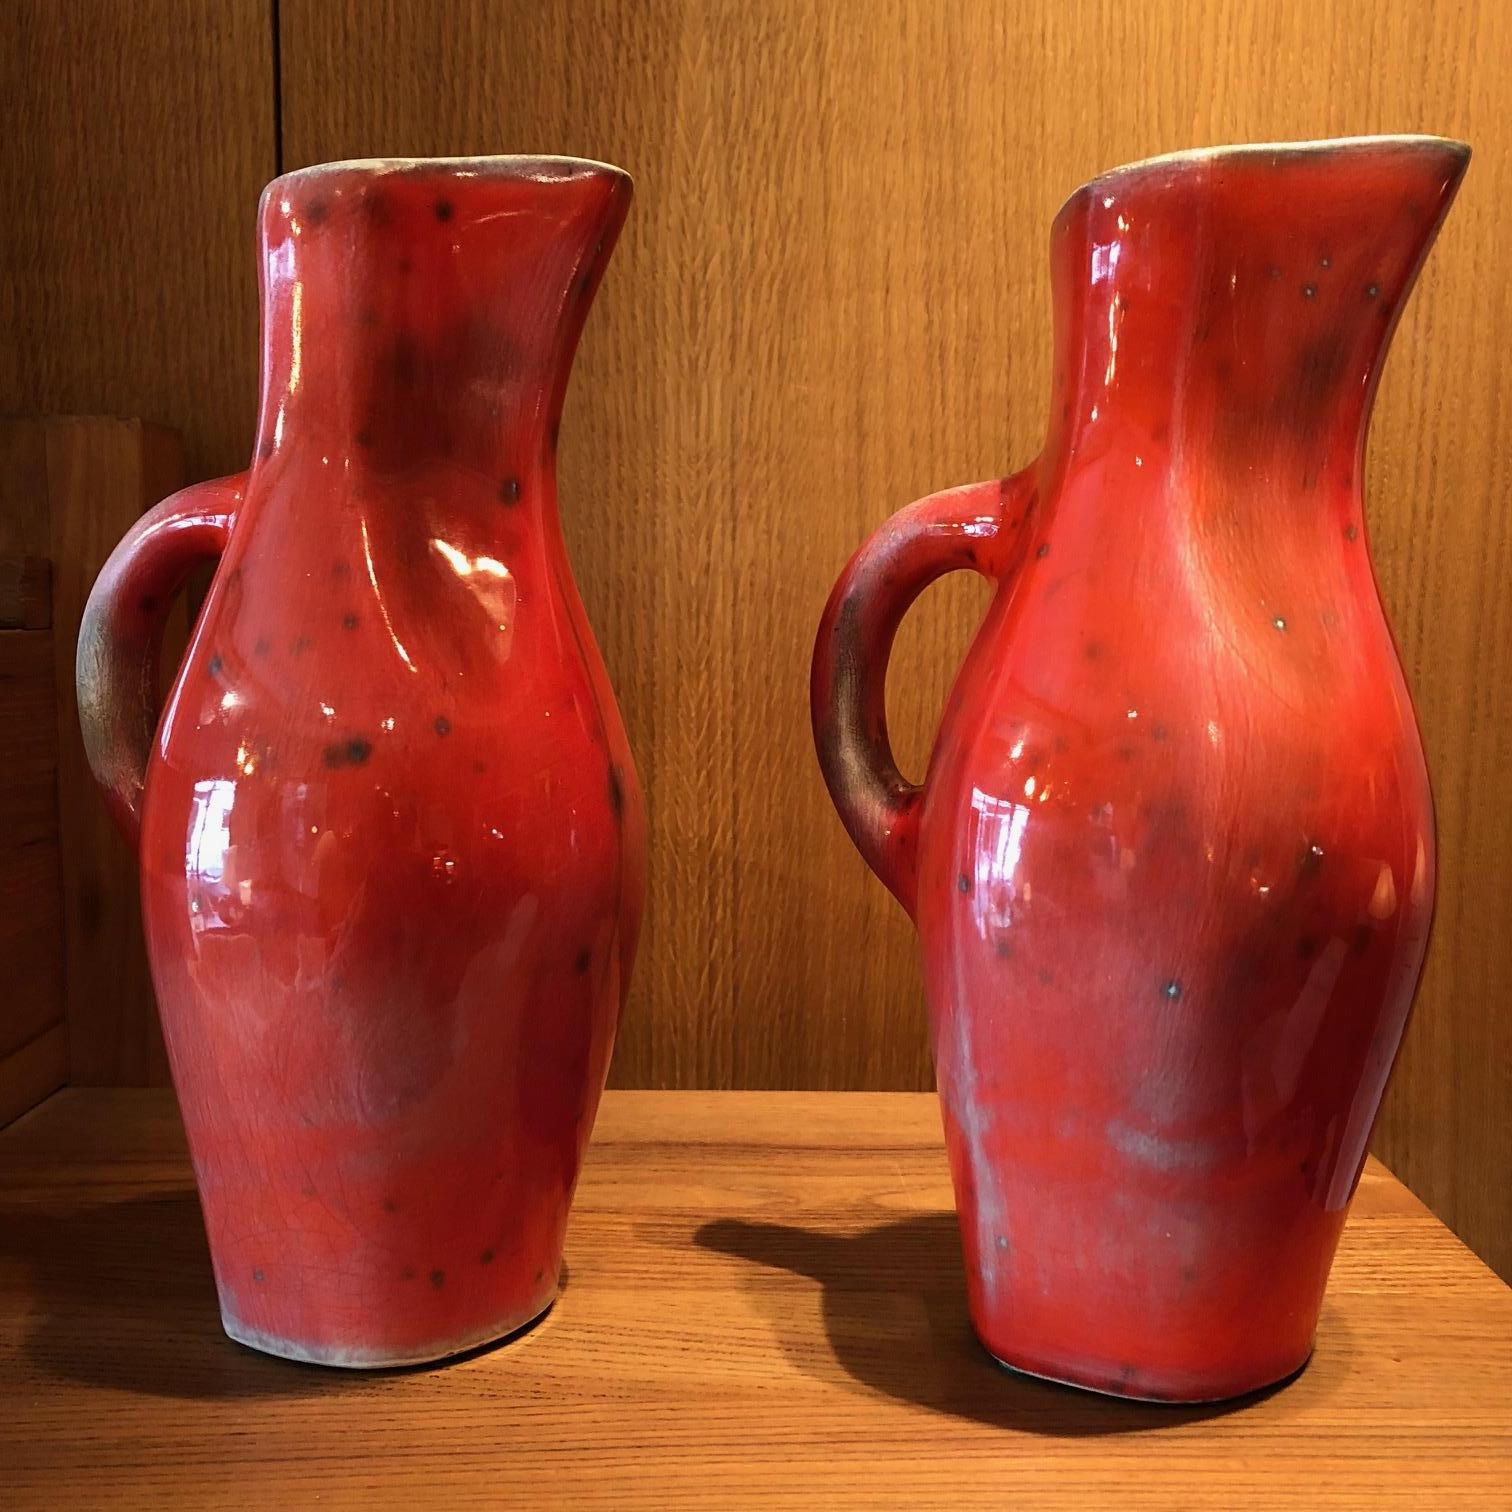 Pair of red-glazed ceramic pitchers by Georges Jouve, 1950s